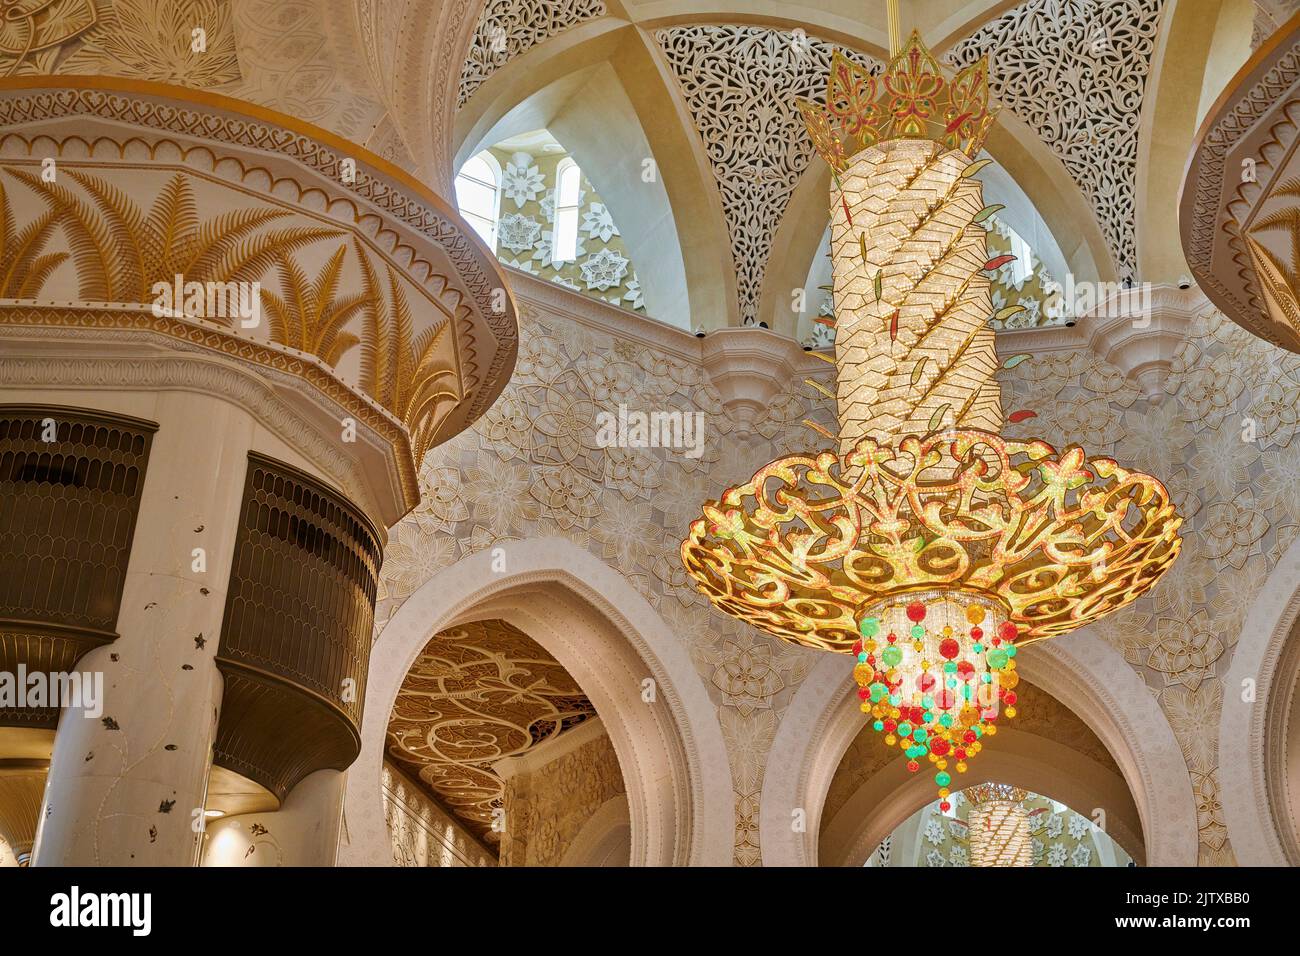 Decorated ceiling with chandelier at Sheikh Zayed Mosque. Abu Dhabi. United Arab Emirates. Stock Photo